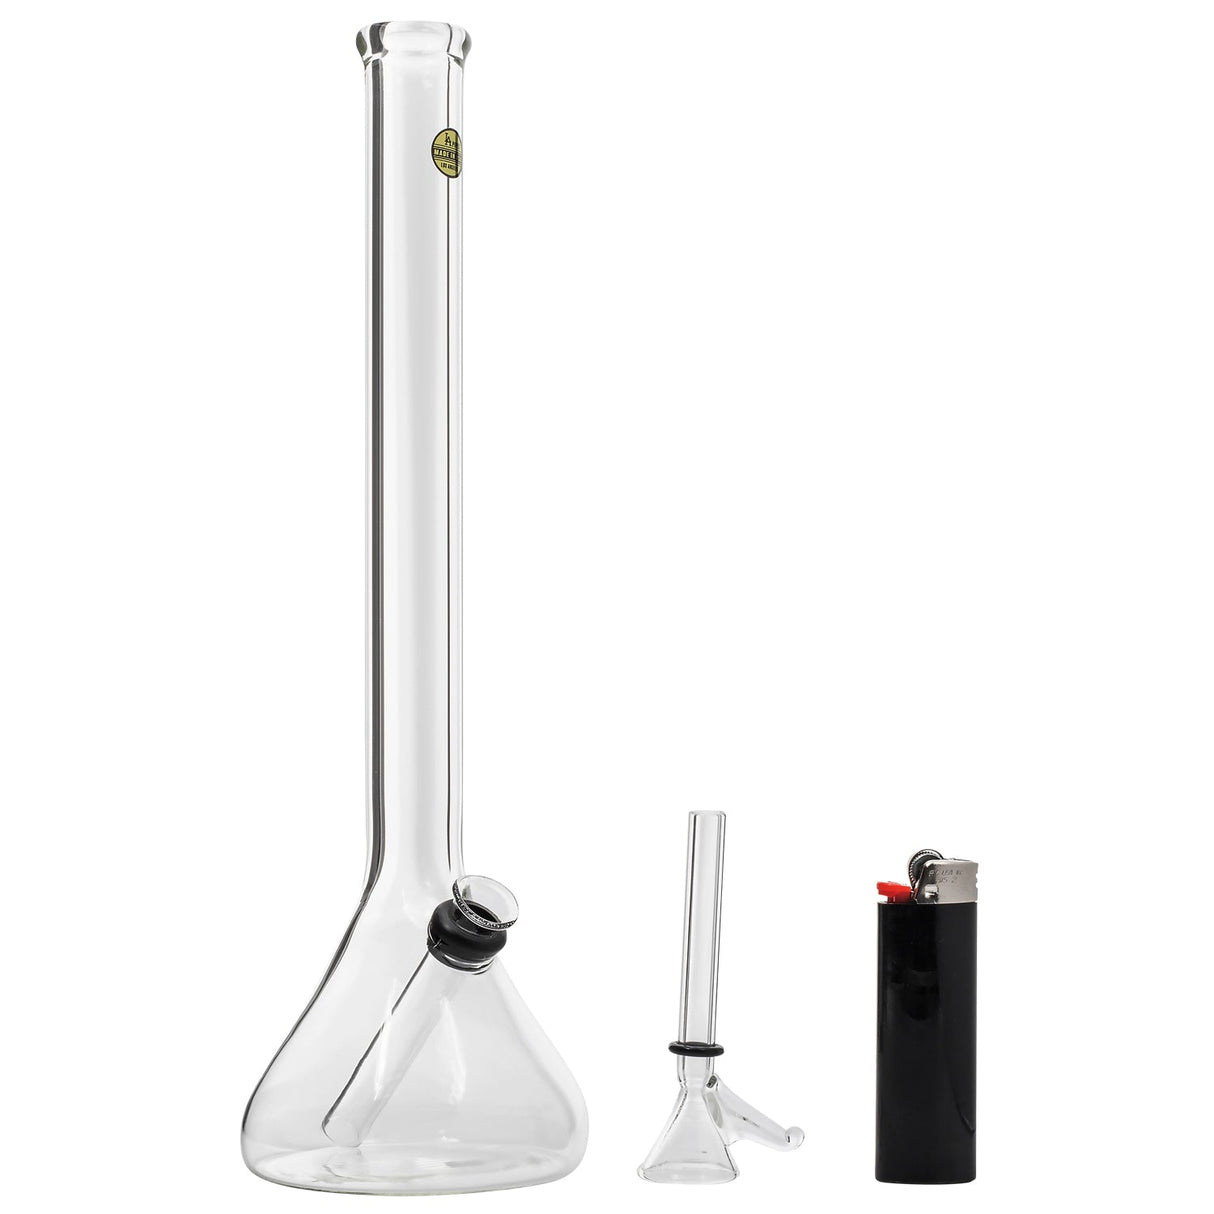 LA Pipes "The OG" Beaker Bong, 12" height, 45-degree joint, USA made, with lighter and down stem